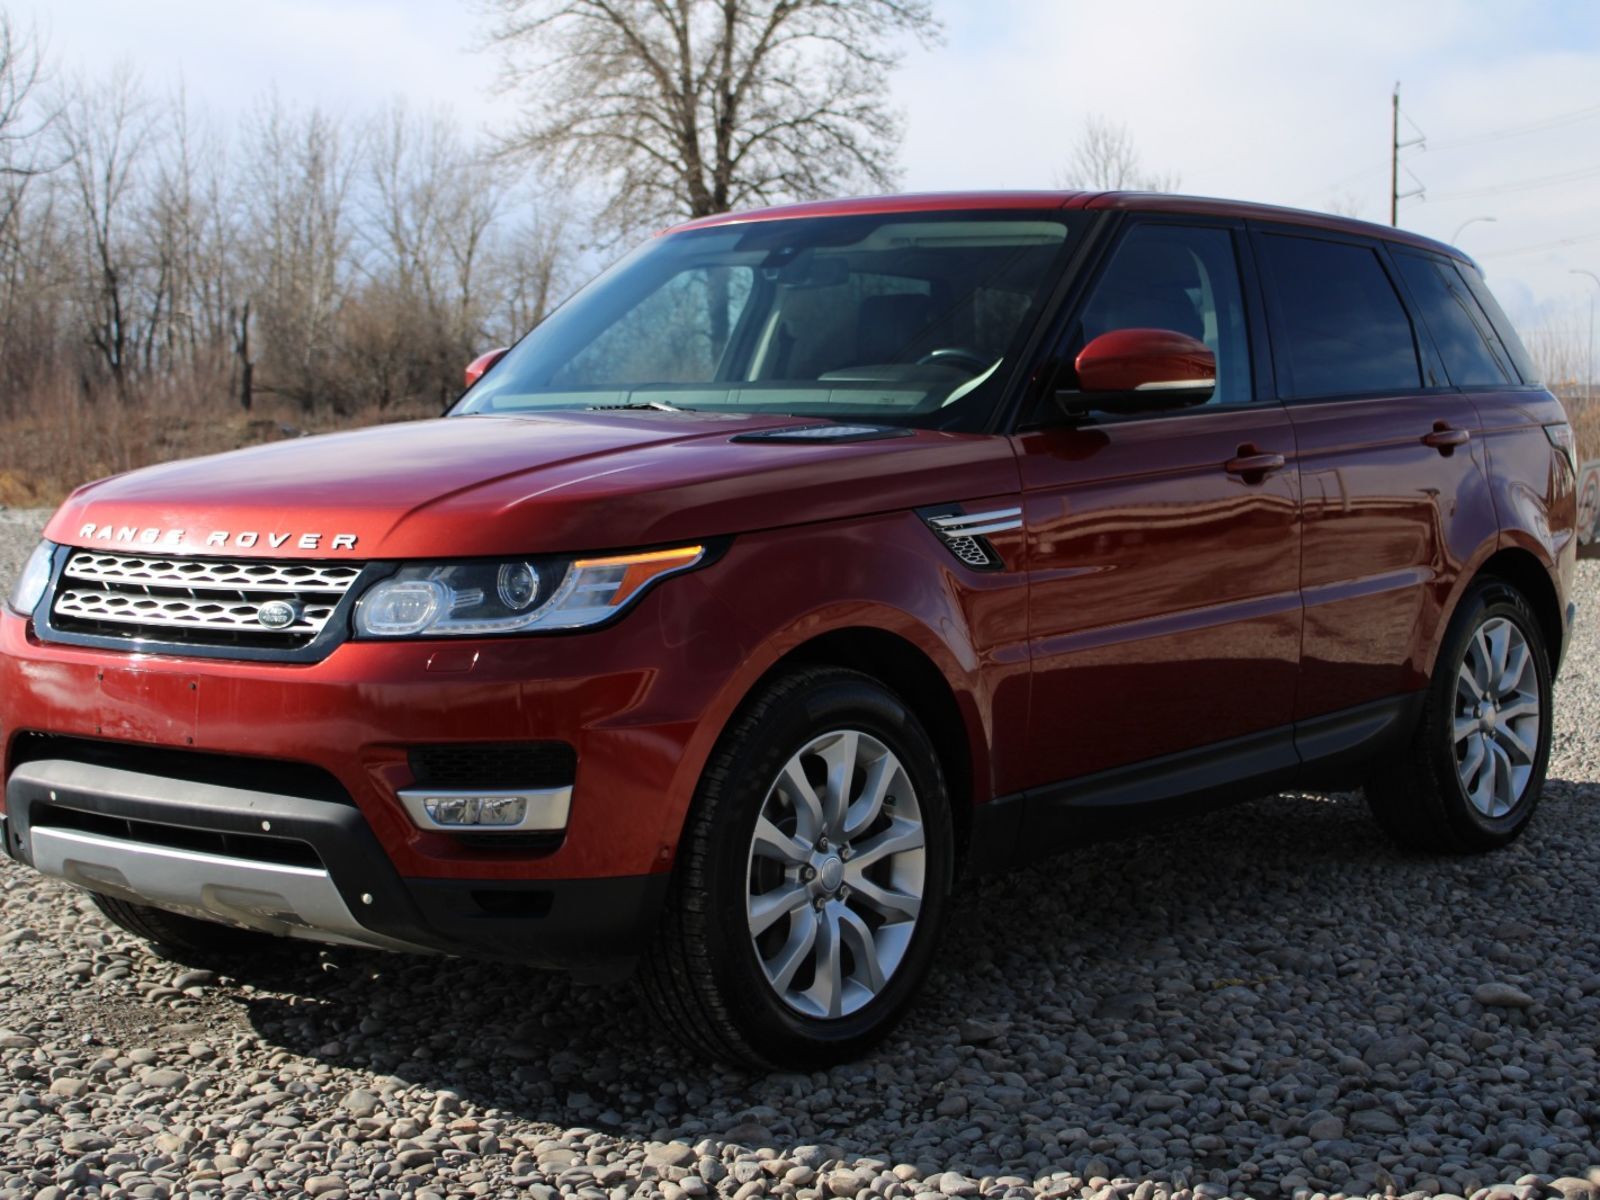 2014 Land Rover Range Rover Sport HSE MODEL - NEW FRONT AIR COMPRESSOR AND SERVICE!